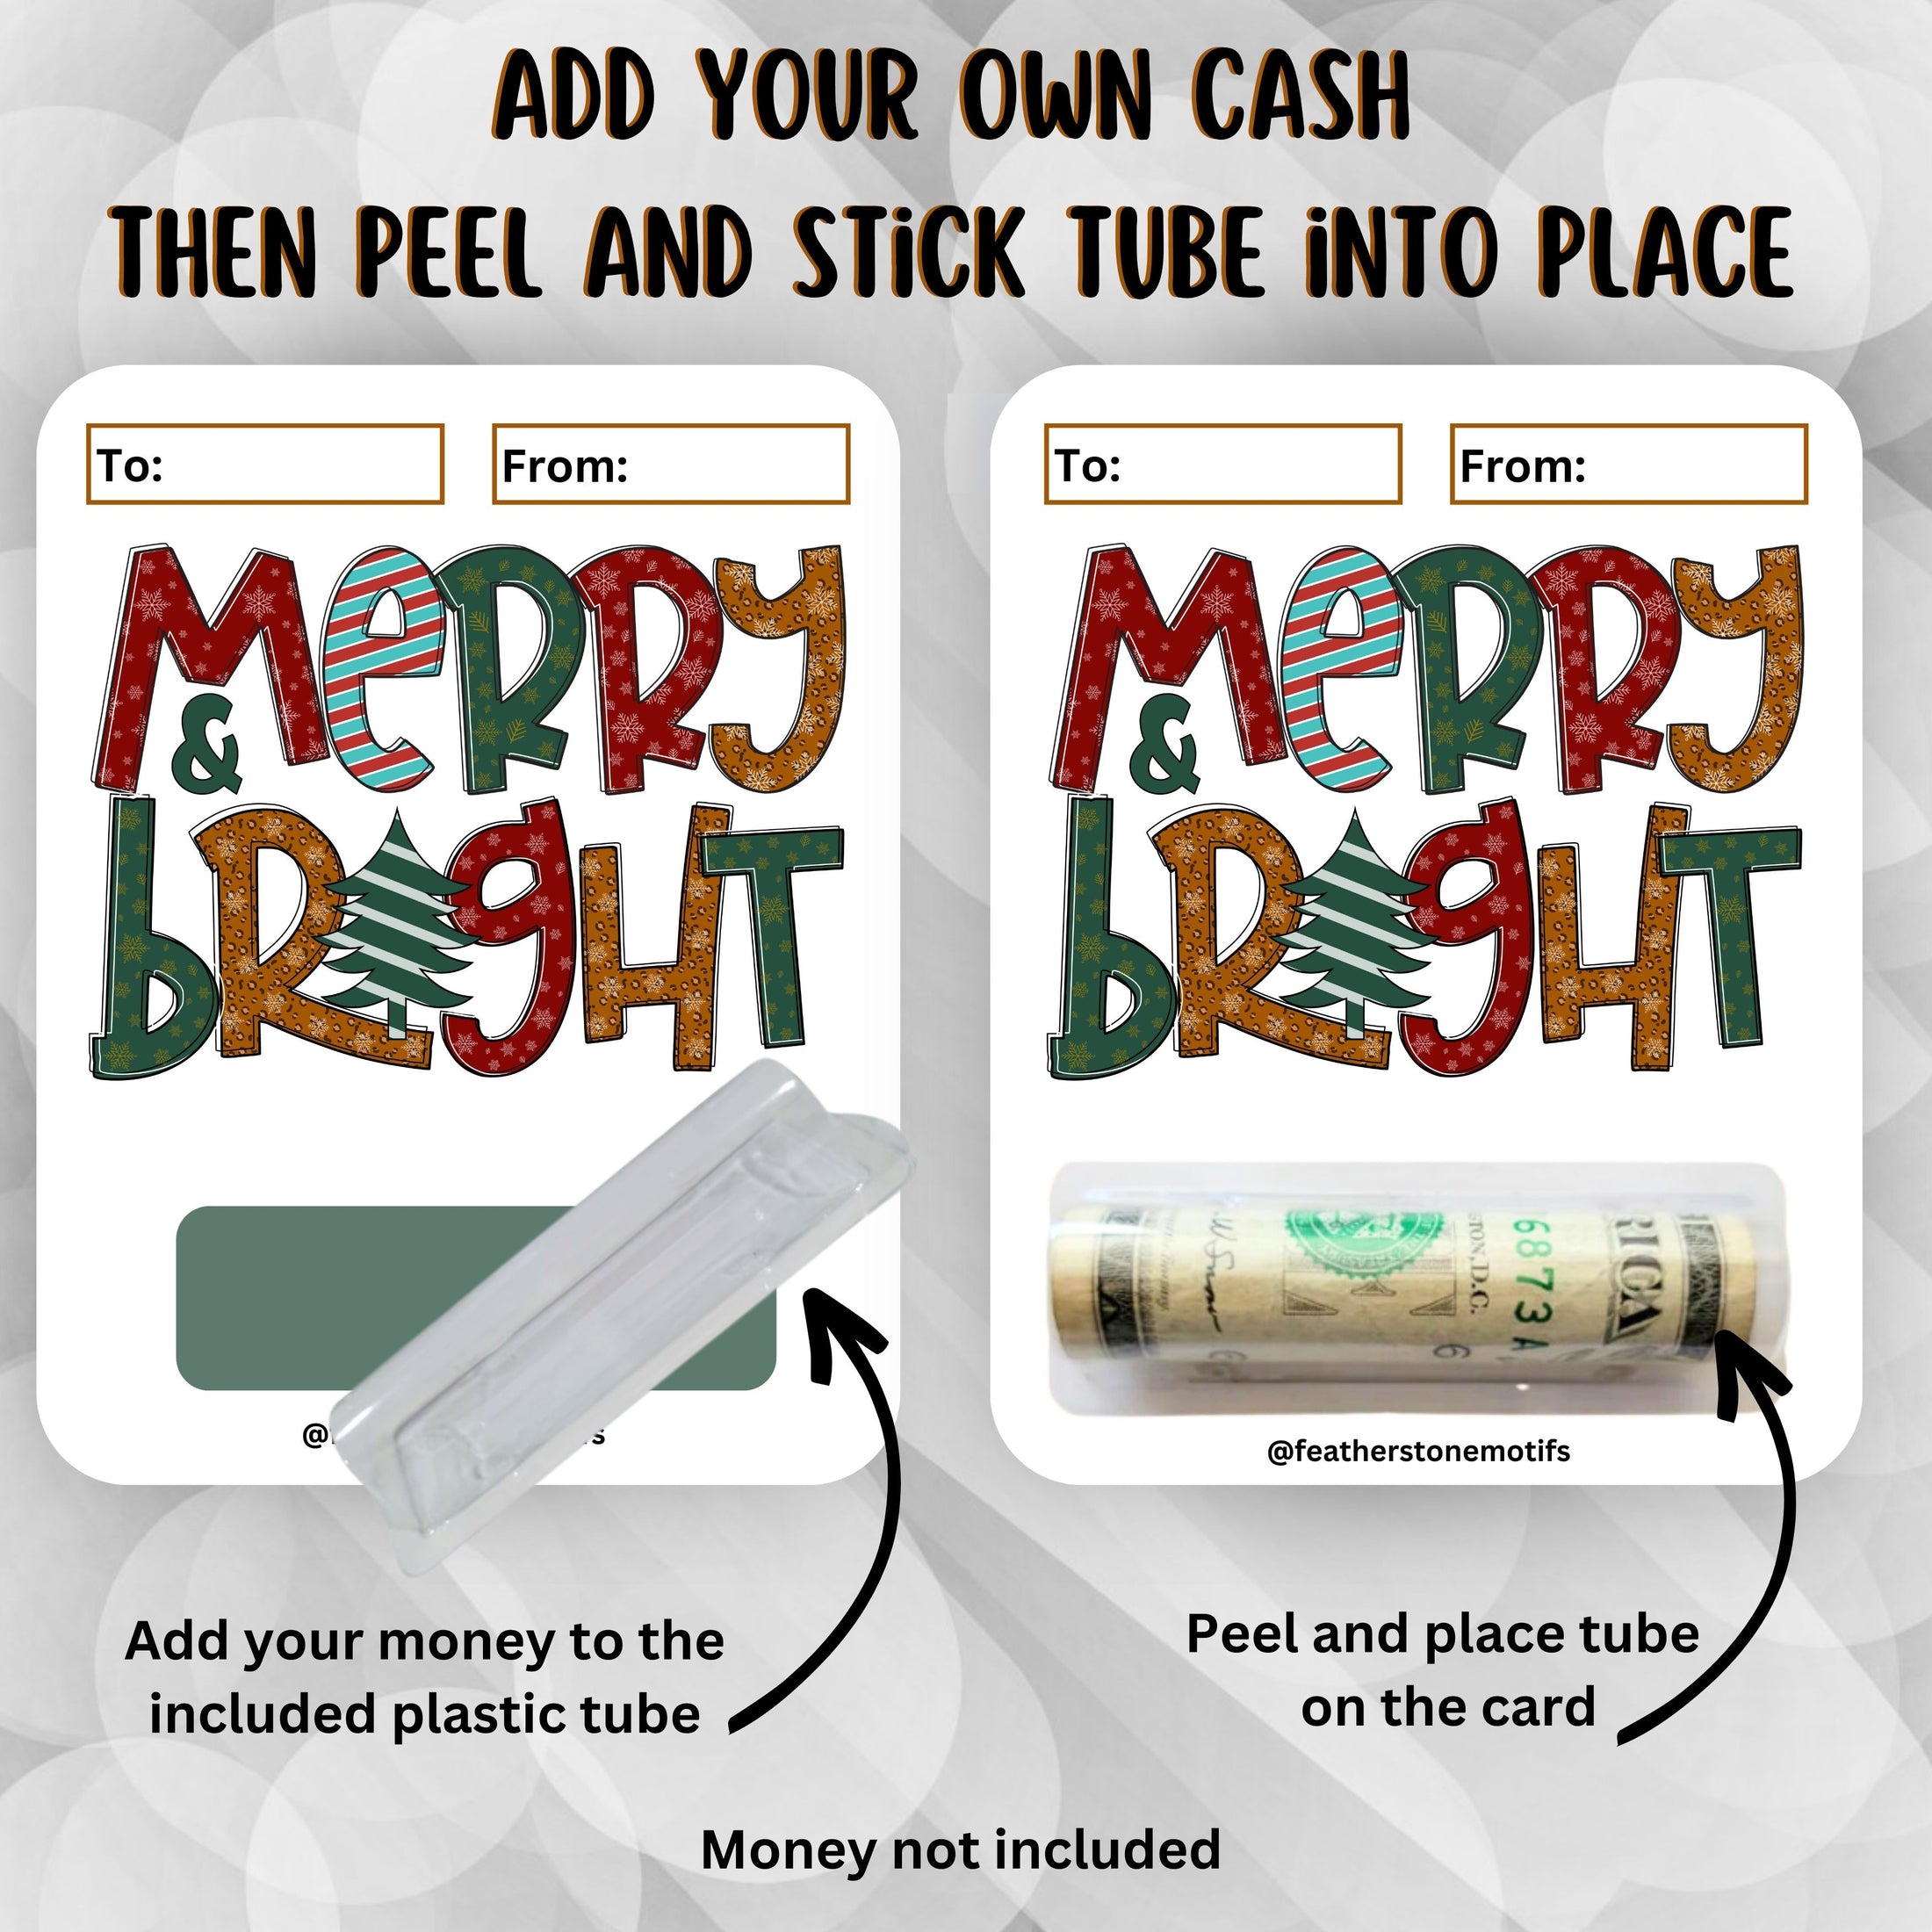 This image shows how to attach the money tube to the Merry & Bright Money Card.